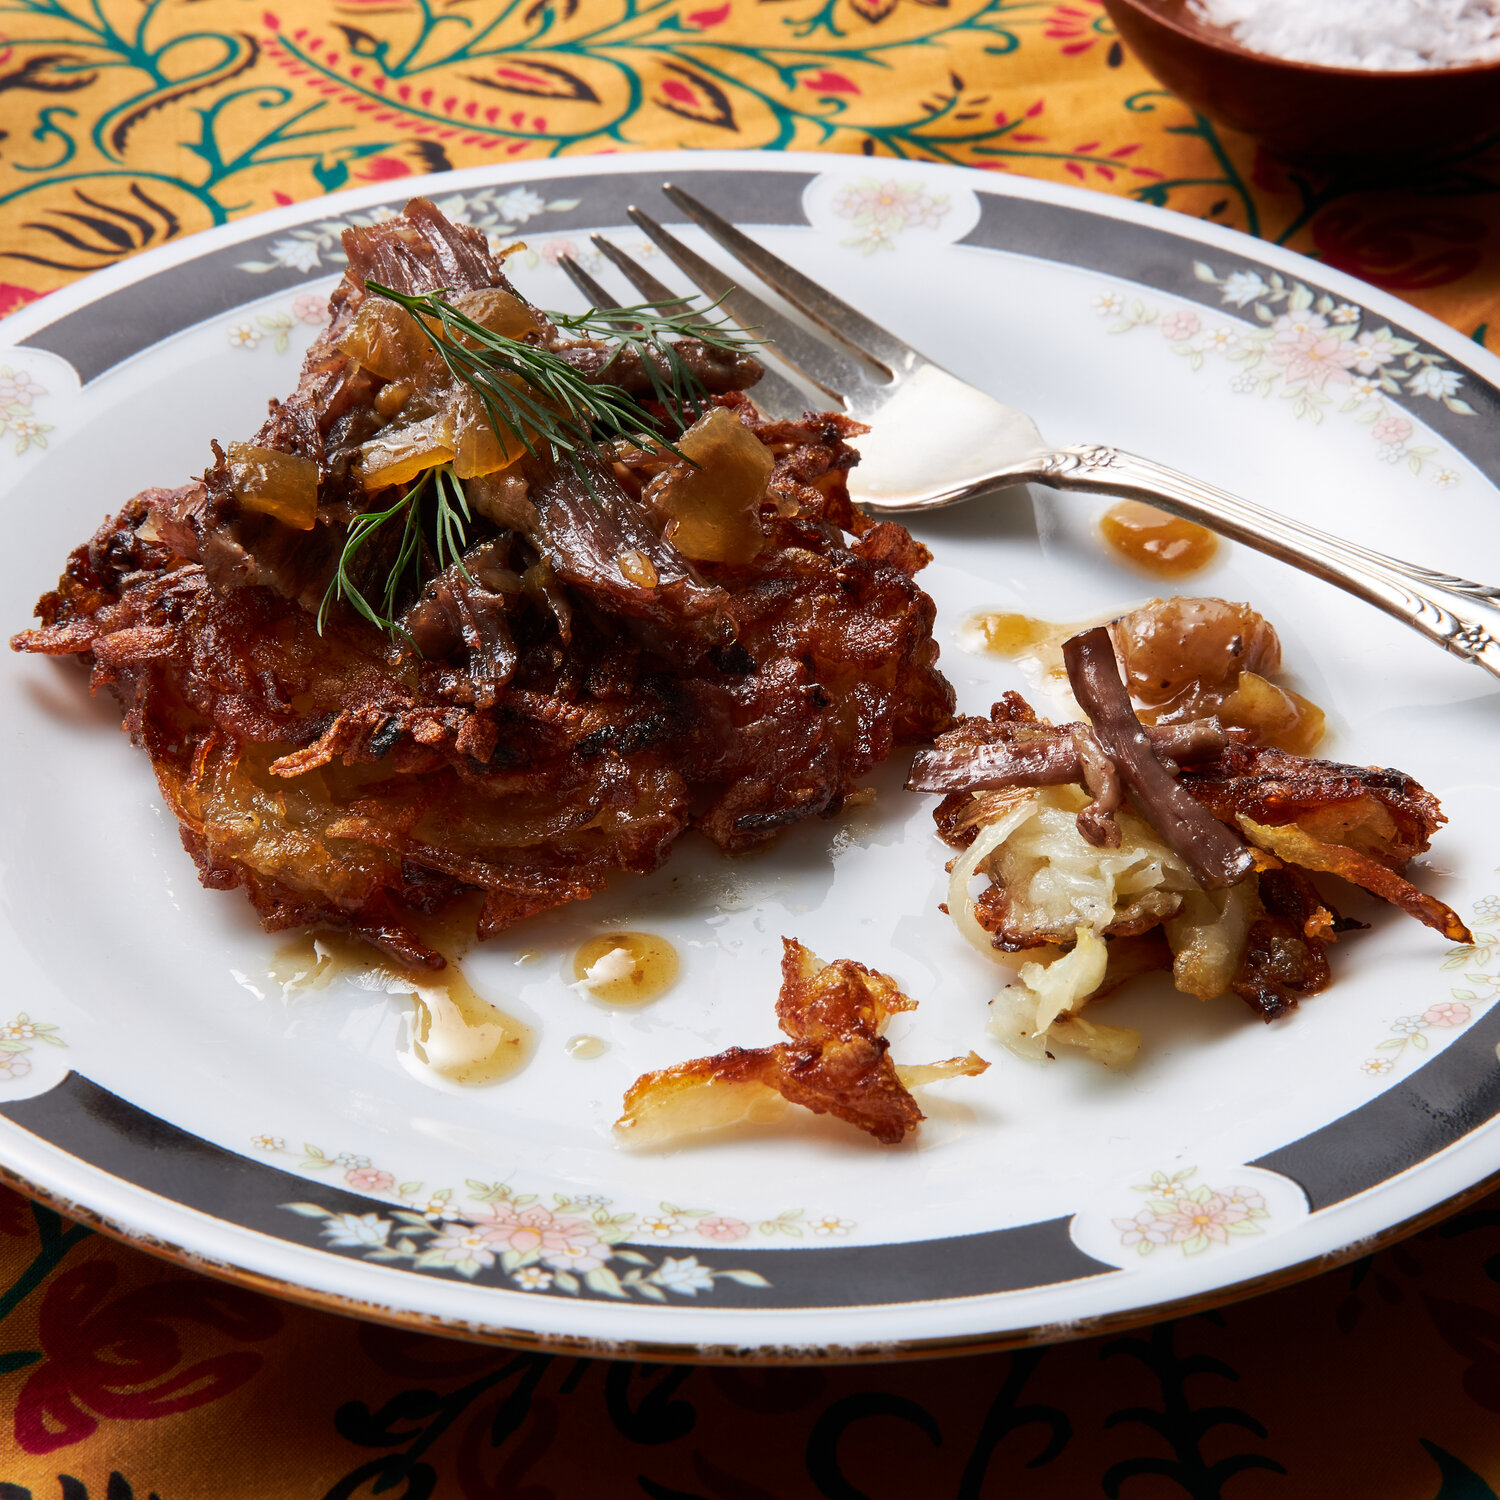 Latkes topped with braised beef and onions on a white plate